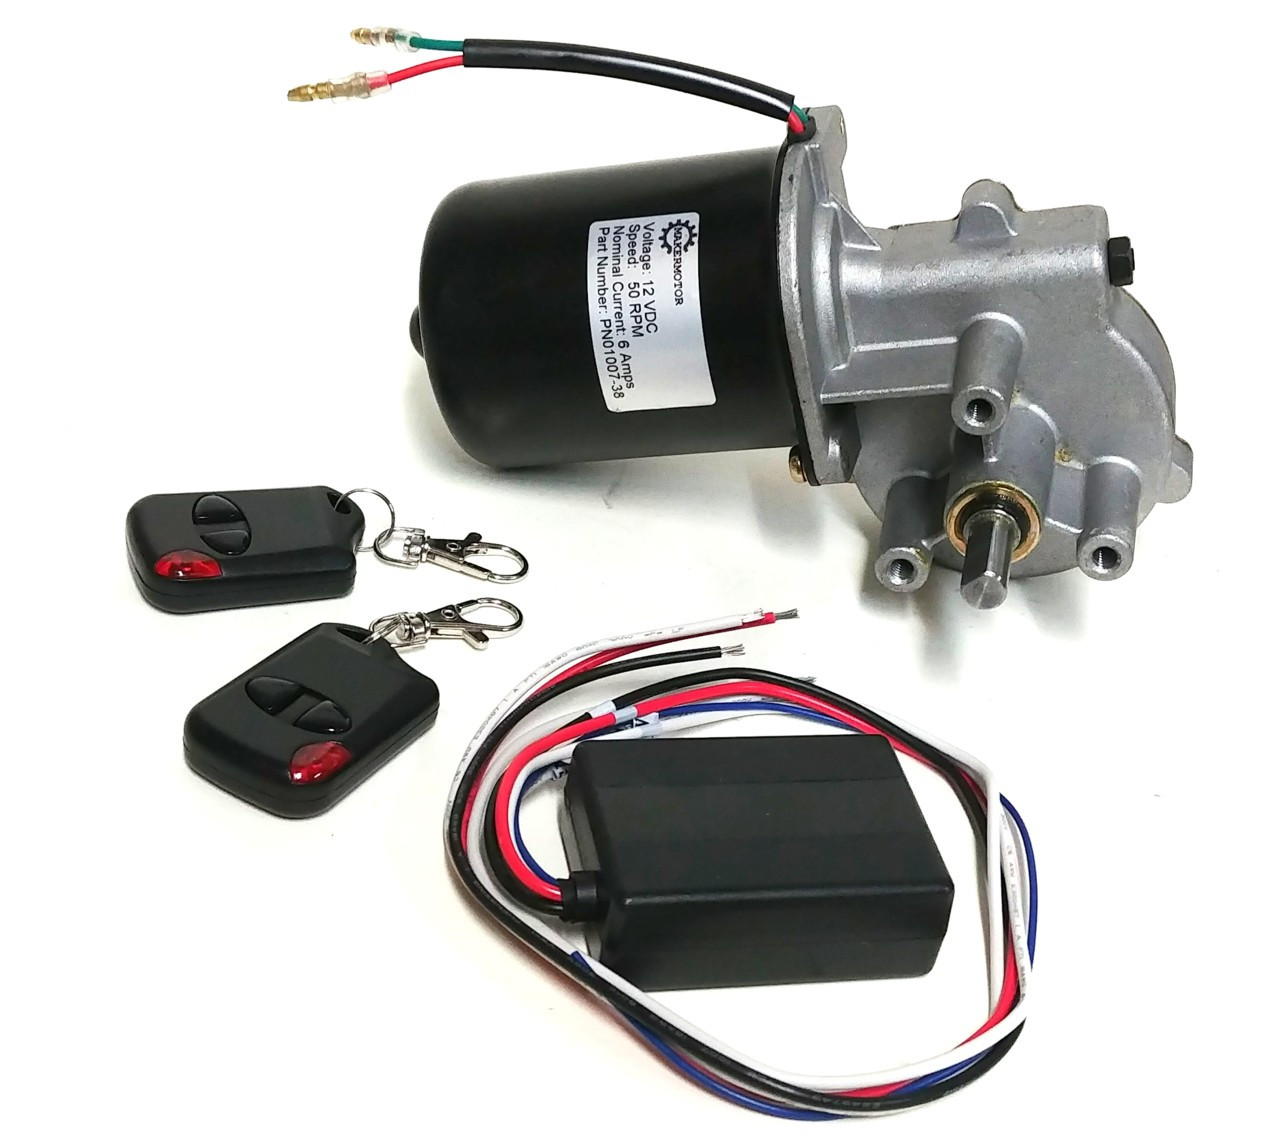 PN00412 - ON/OFF Switch Option 12v dc 50 RPM gear motor with wireless  remote control